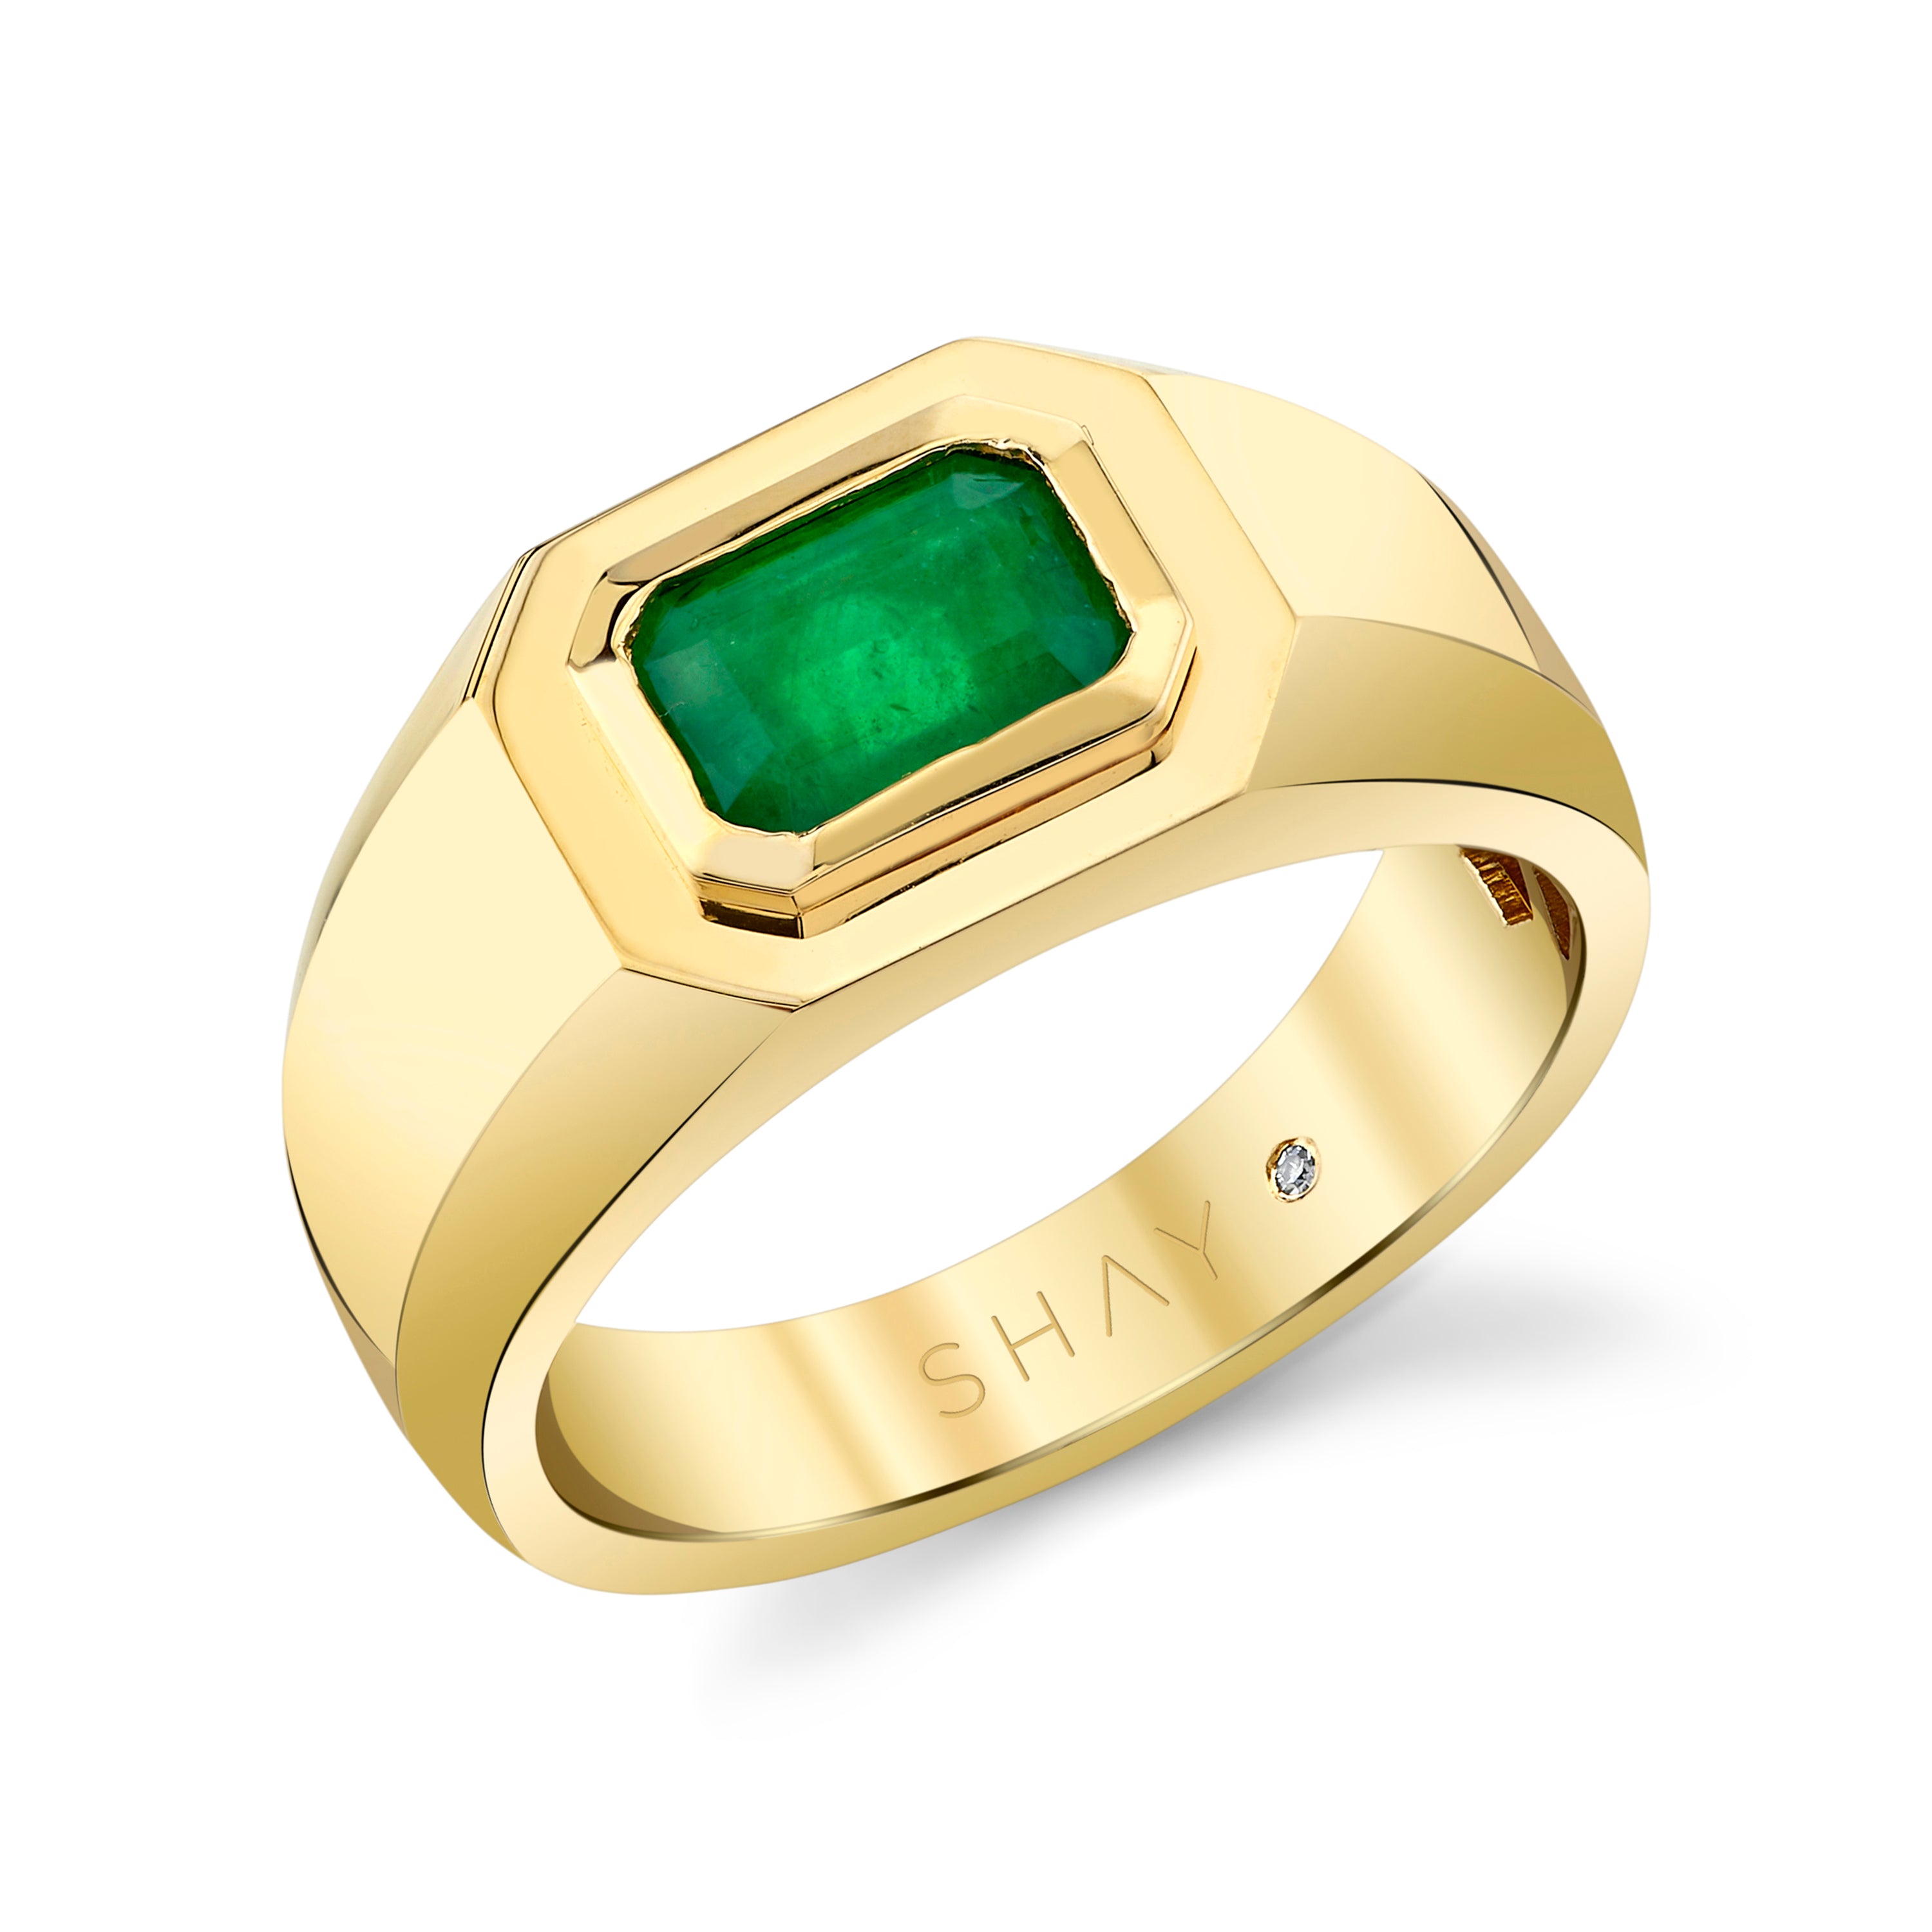 7ct Natural Emerald Ring in 14k Solid Gold / Wedding Emerald Ring For Men's  | eBay